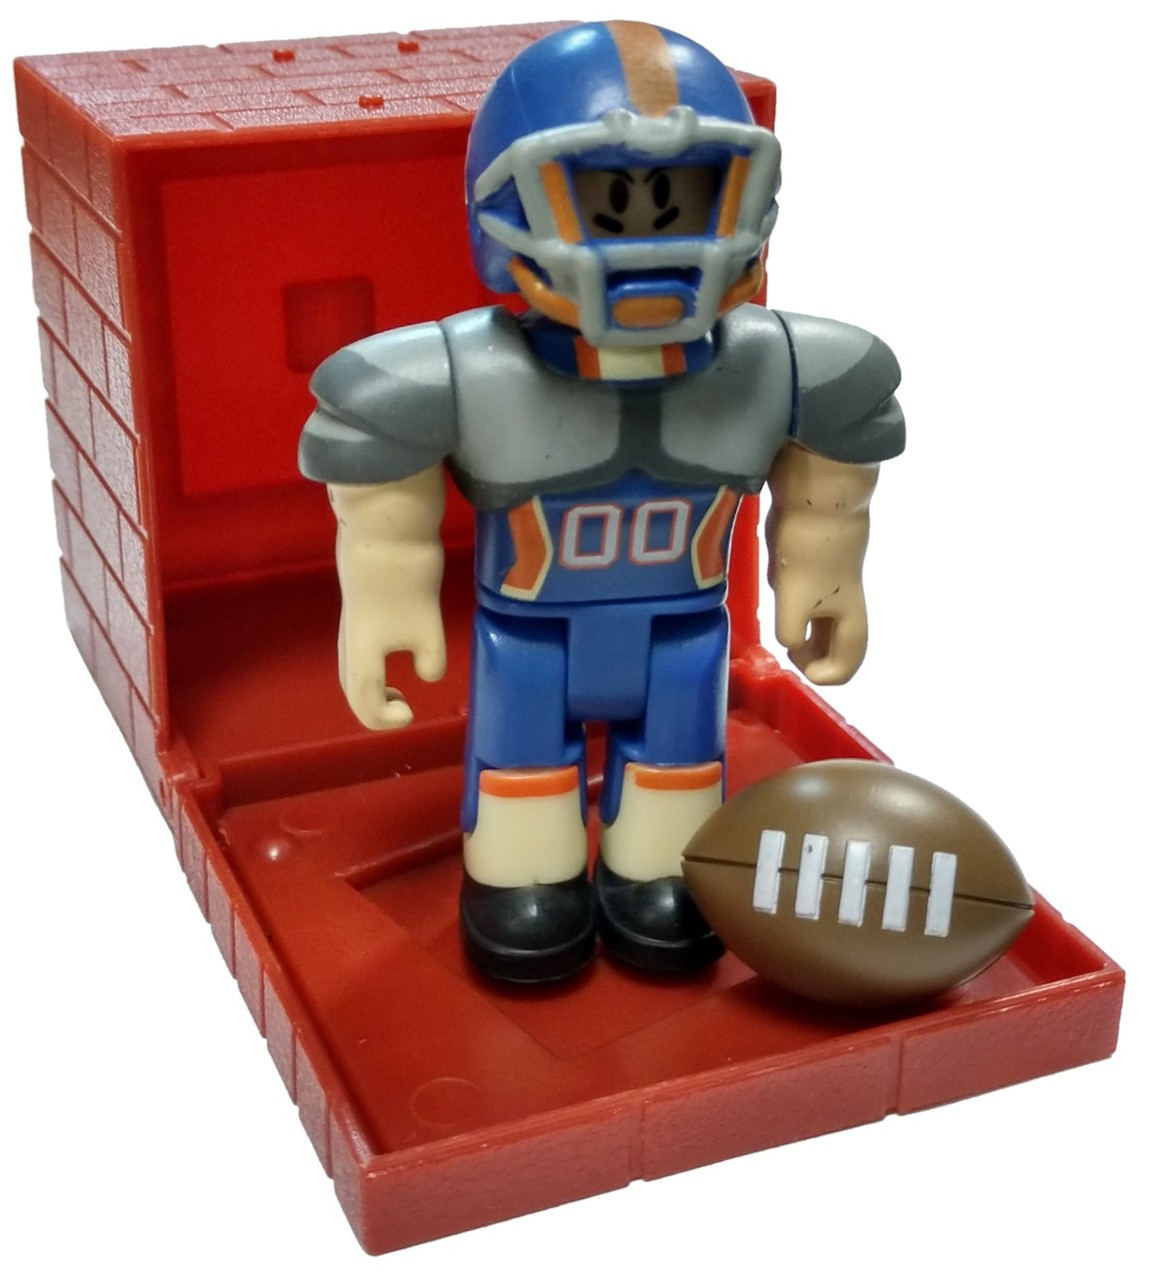 Roblox Red Series 4 Roblox High School Quarterback 3 Mini Figure With Red Cube And Online Code Loose Jazwares Toywiz - roblox high school codes for gears